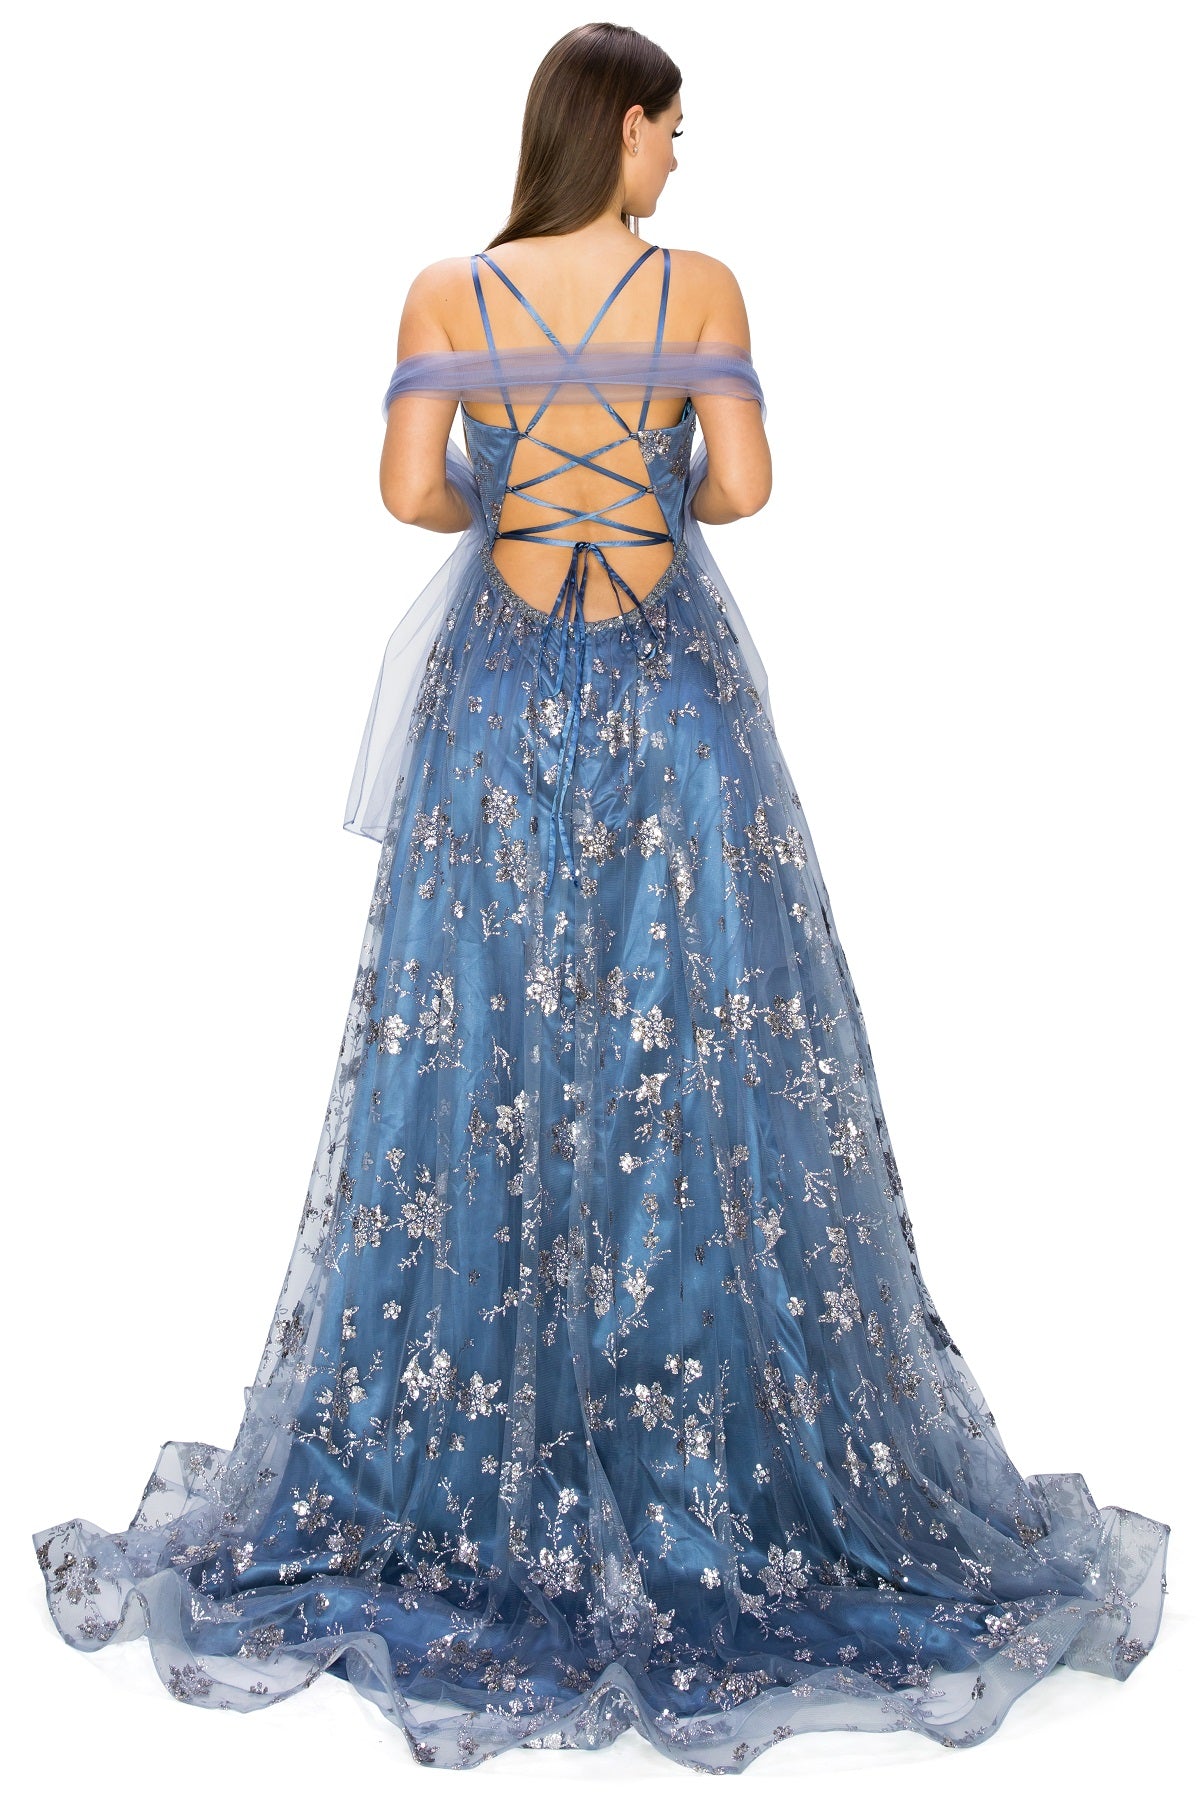 Sequin A-line Gown by Cinderella Couture USA AS8022J-dblue - Special Occasion/Curves